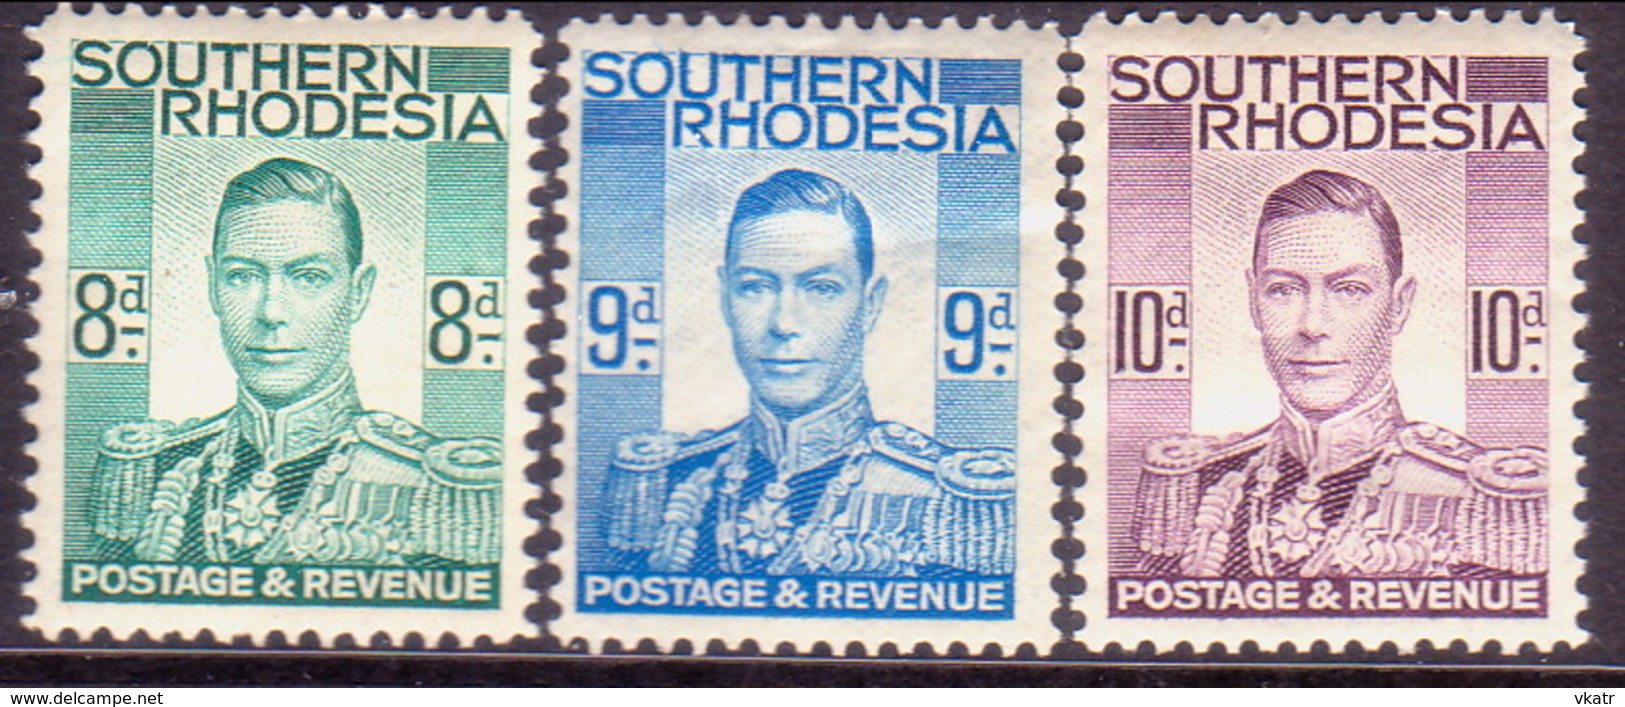 SOUTHERN RHODESIA 1937 SG 45,46,47 Part Set MH 3 Stamps Of 13 - Southern Rhodesia (...-1964)